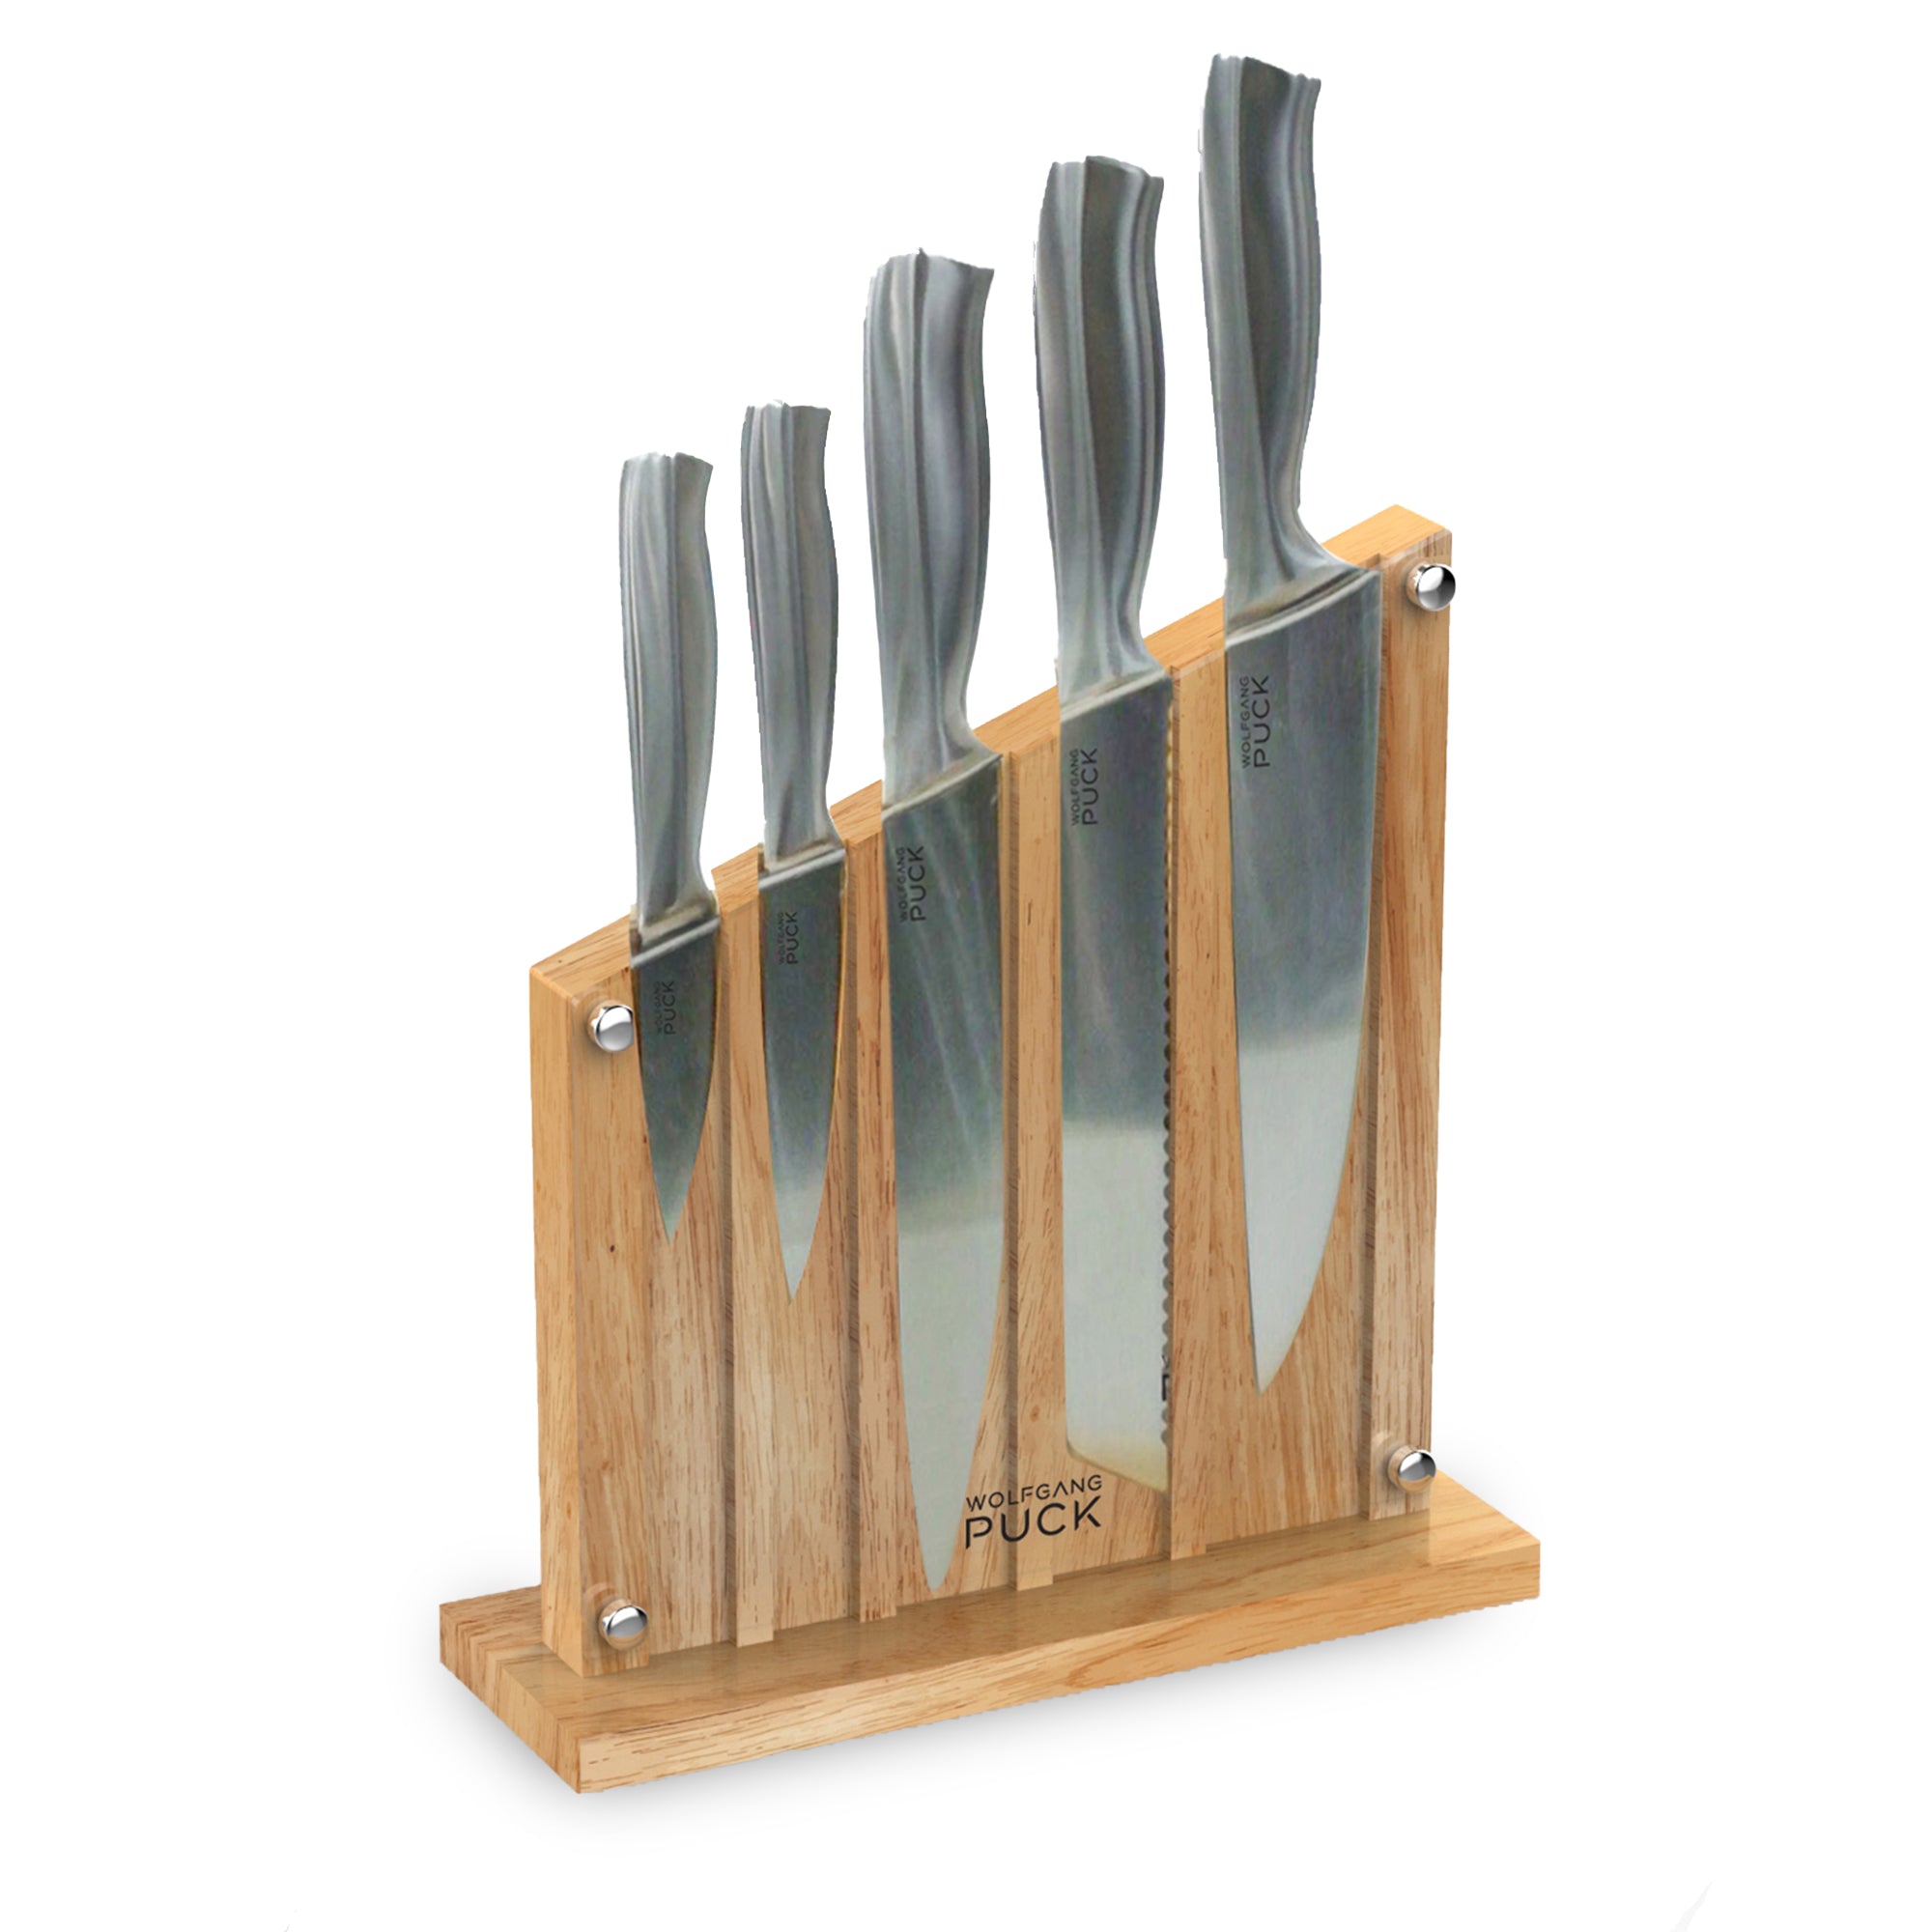 carbon stainless steel knife set